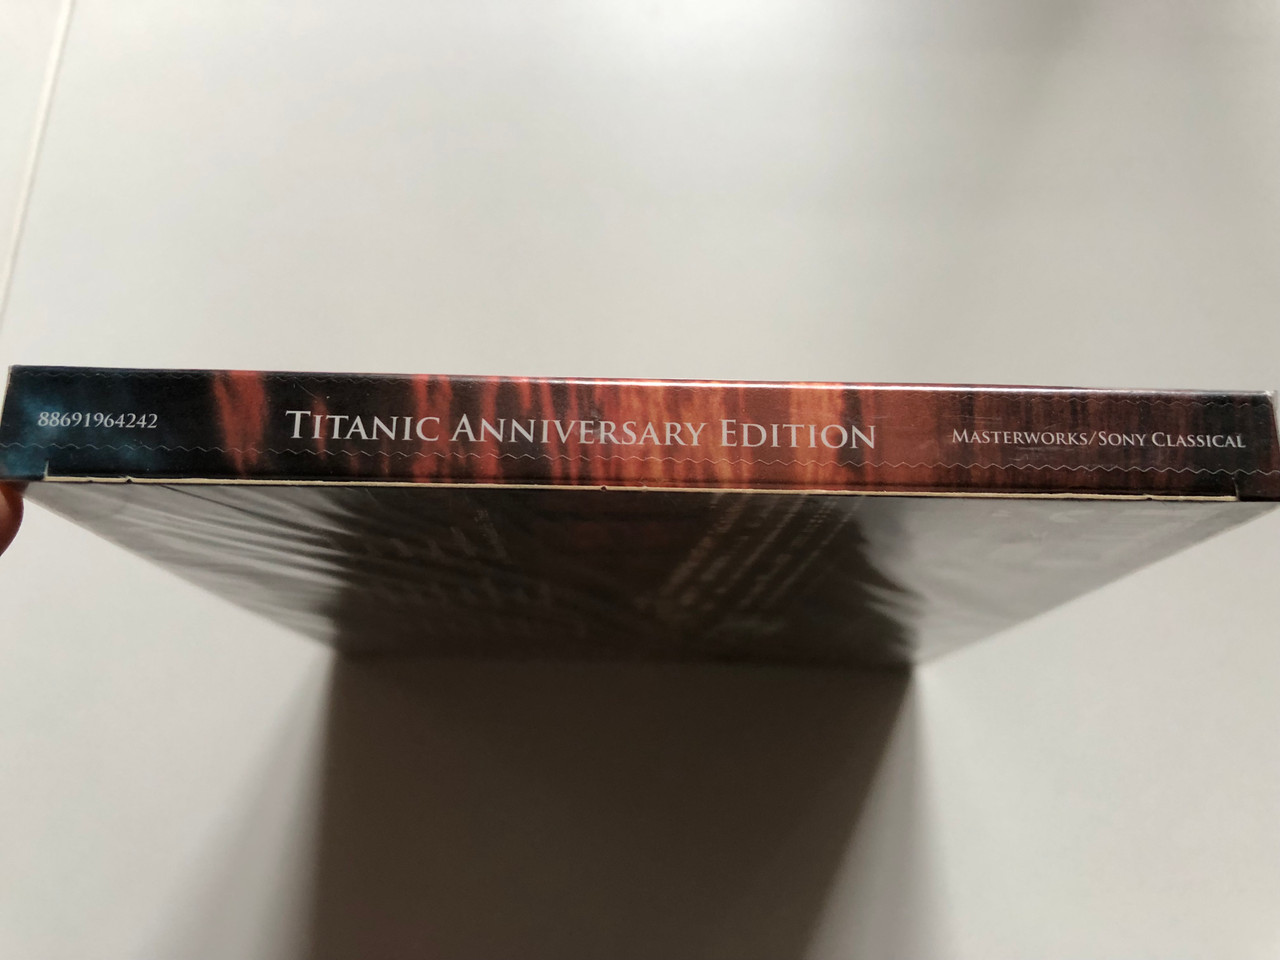 https://cdn10.bigcommerce.com/s-62bdpkt7pb/products/0/images/243551/Titanic_Music_From_The_Motion_Picture_-_Anniversary_Edition_-_Music_Composed_And_Conducted_By_James_Horner_Specially_Priced_2-CD_Set_Masterworks_2x_Audio_CD_2012_88691964242_3__66730.1658999974.1280.1280.JPG?c=2&_gl=1*jfvubq*_ga*MjA2NTIxMjE2MC4xNTkwNTEyNTMy*_ga_WS2VZYPC6G*MTY1ODk5Nzg3OC41MDMuMS4xNjU4OTk5Njc4LjQz